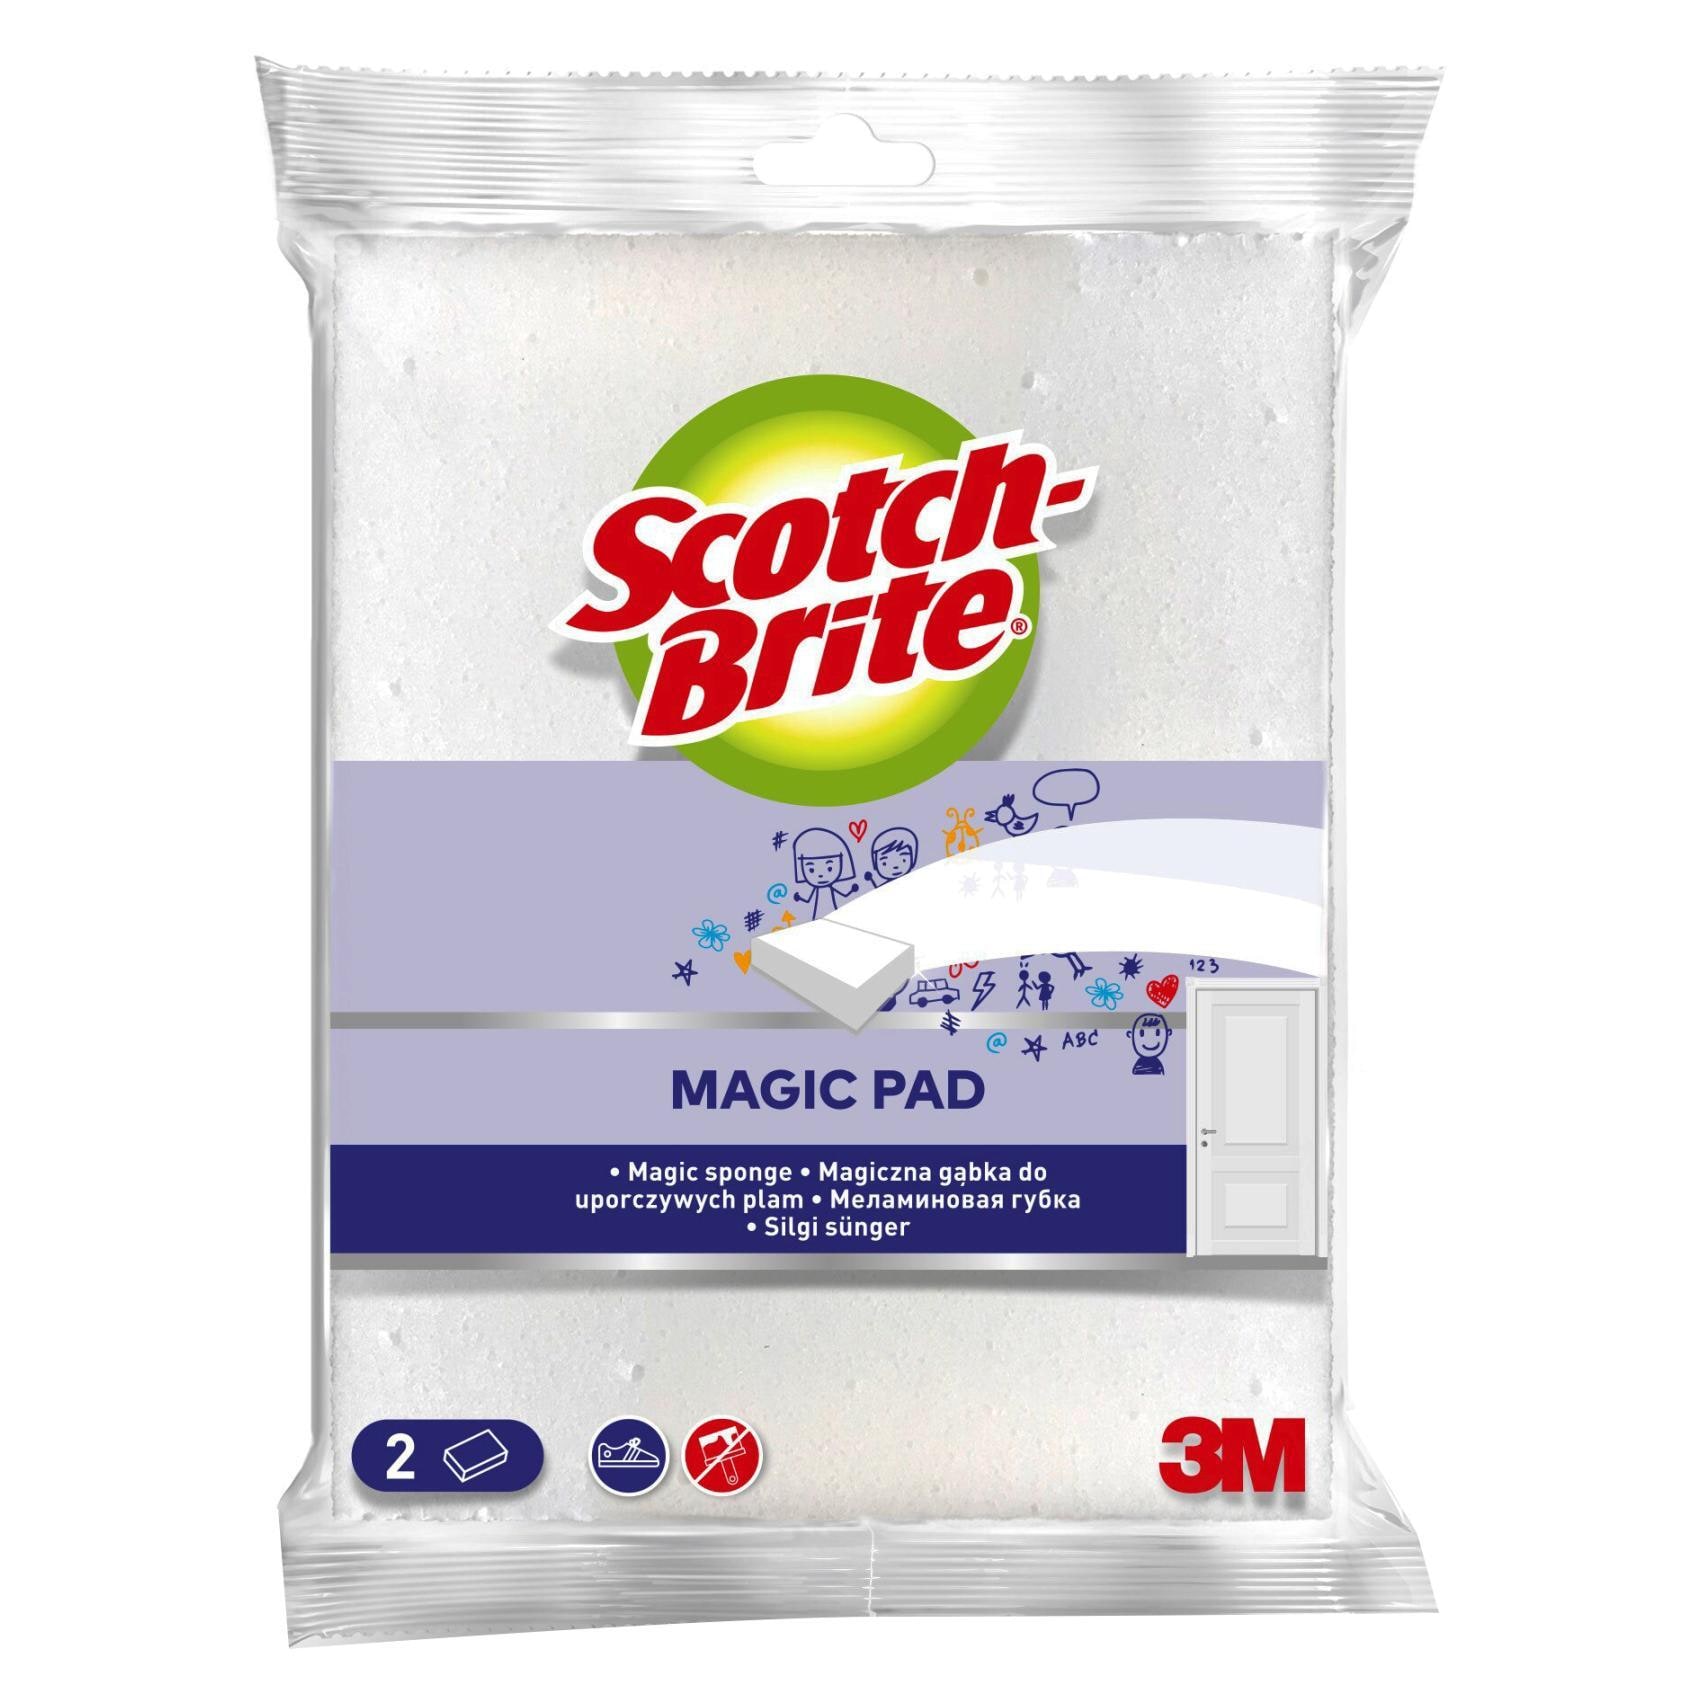 Buy Scotch-Brite Easy Erasing Pad Magic Pad easily removes a variety of  stains and marks. 2 units/pack Online - Shop Cleaning & Household on  Carrefour UAE